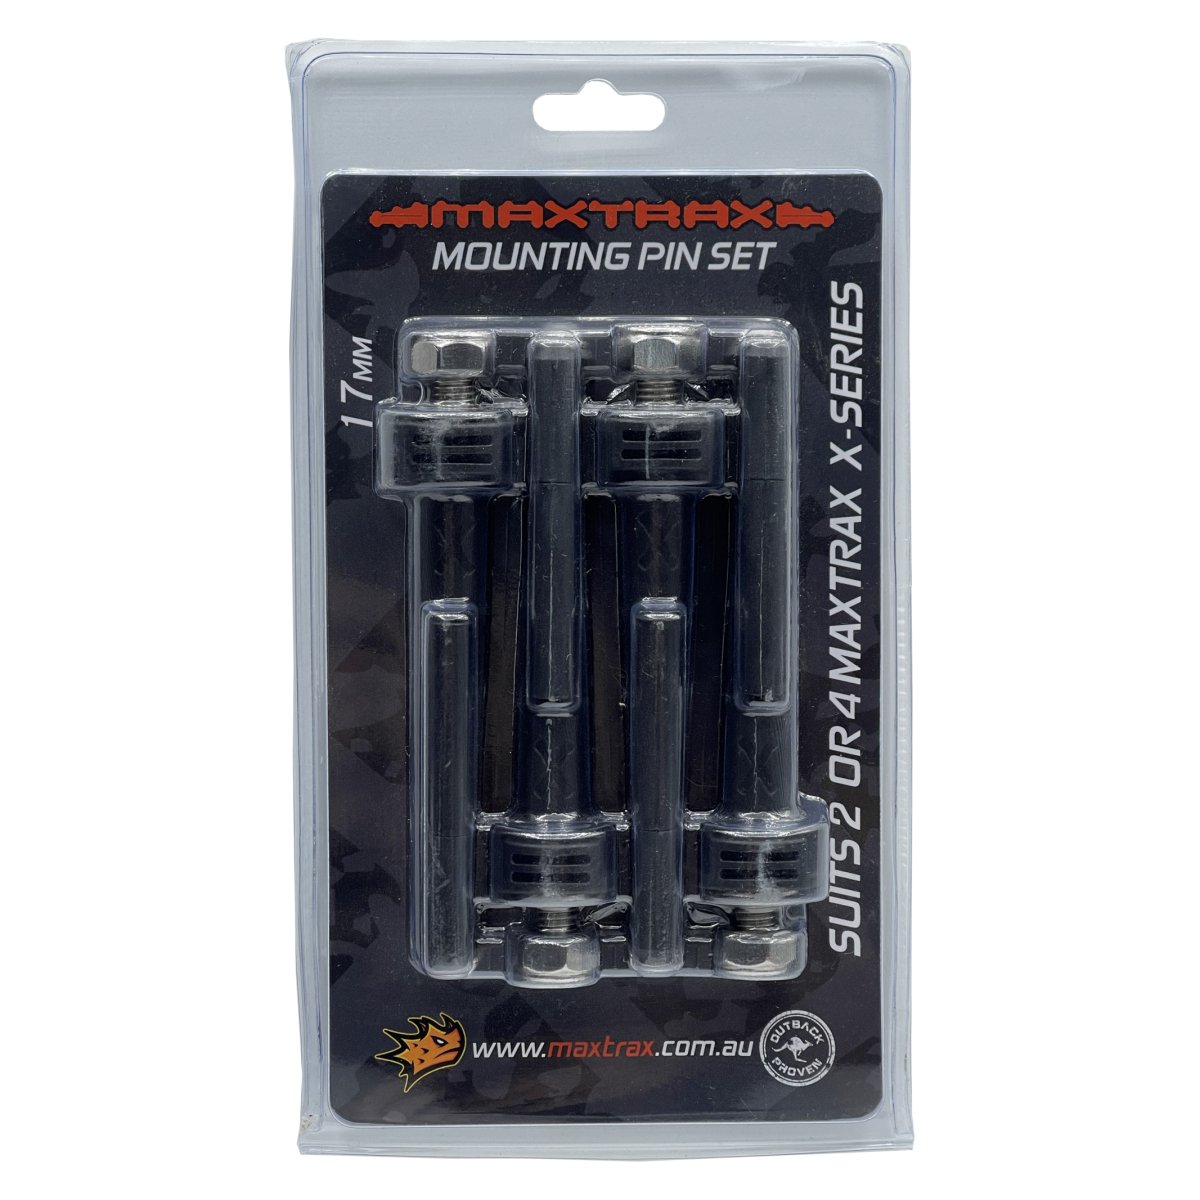 MAXTRAX Mounting Pin Set 17mm - Holds 2x MK2 or Xtreme | Maxtrax | A247 Gear